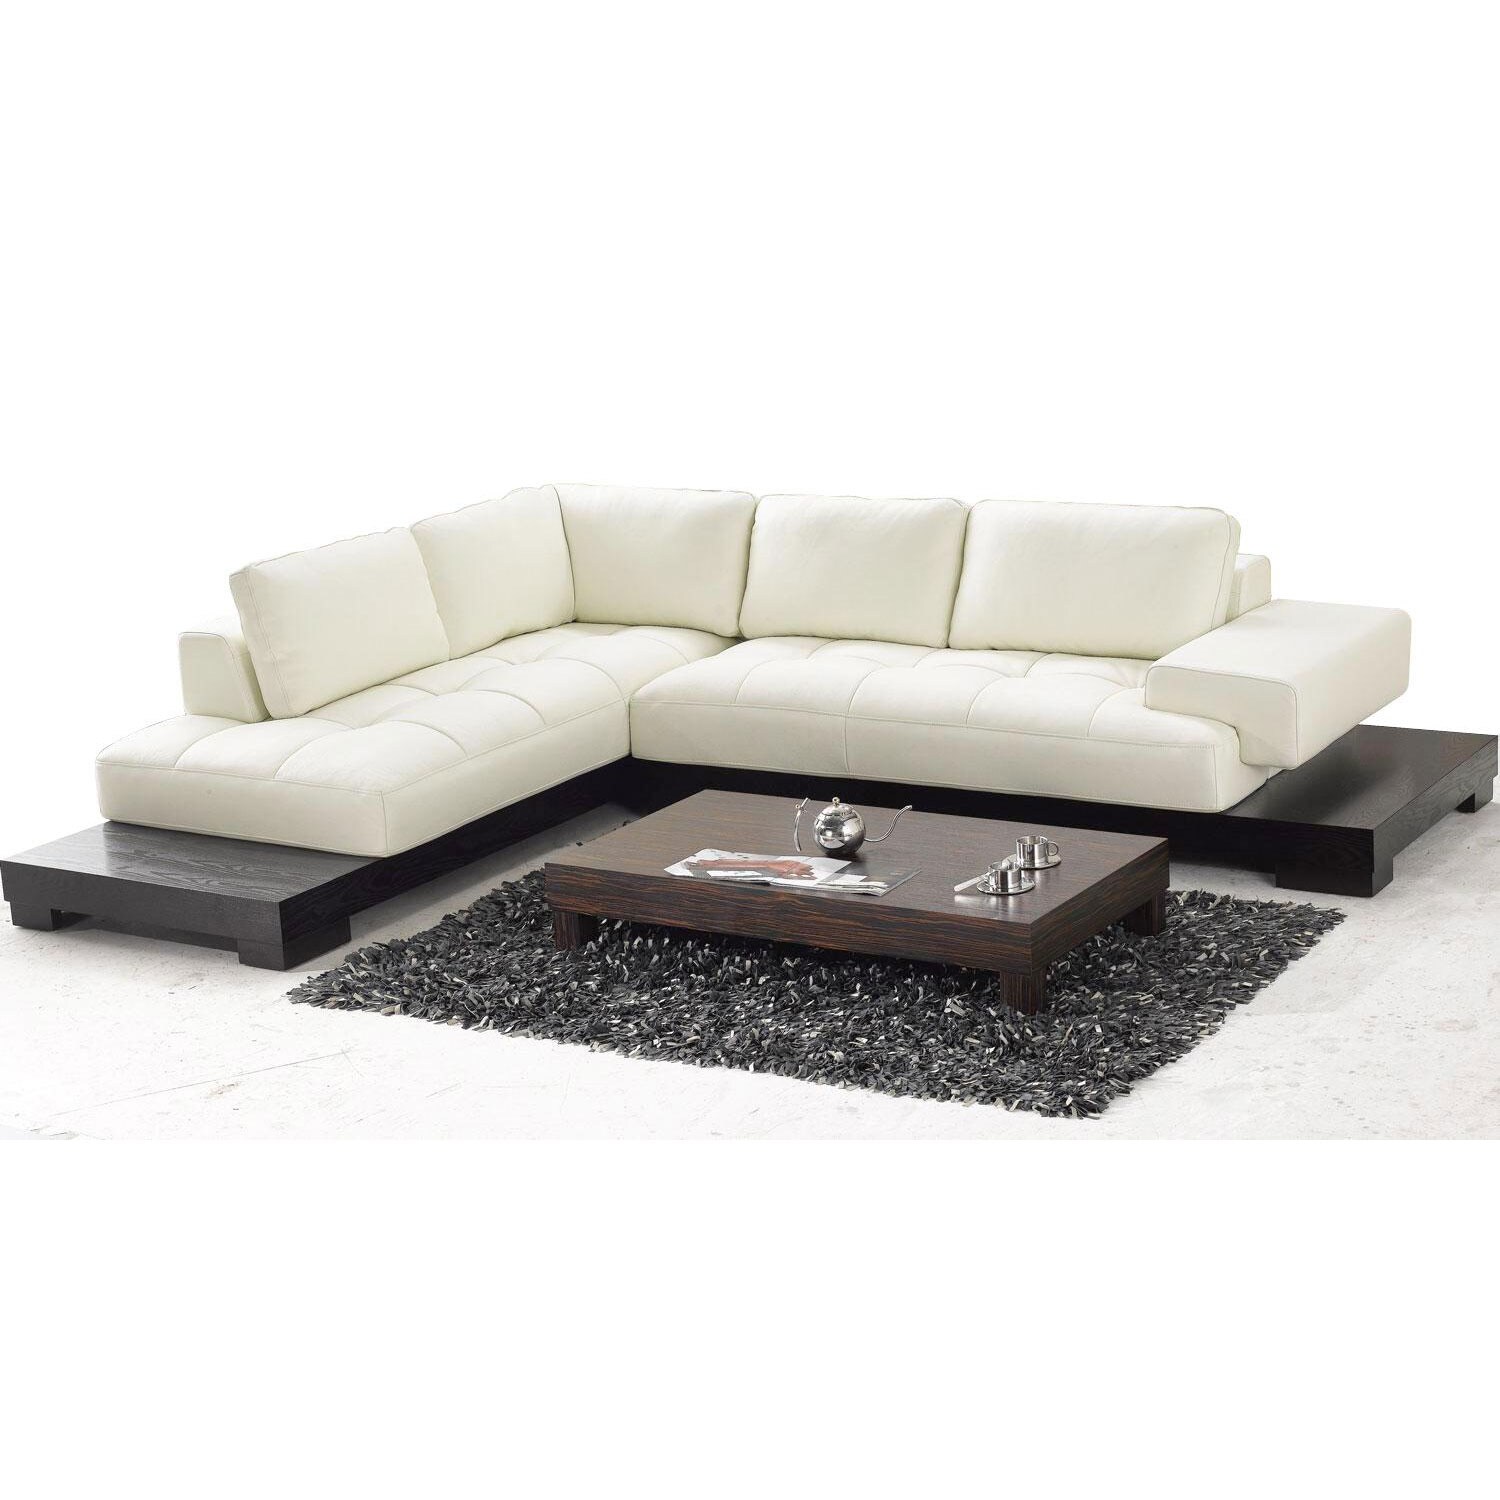 Tosh Furniture Beige Leather Sectional Sofa - Overstock™ Shopping - Big ...